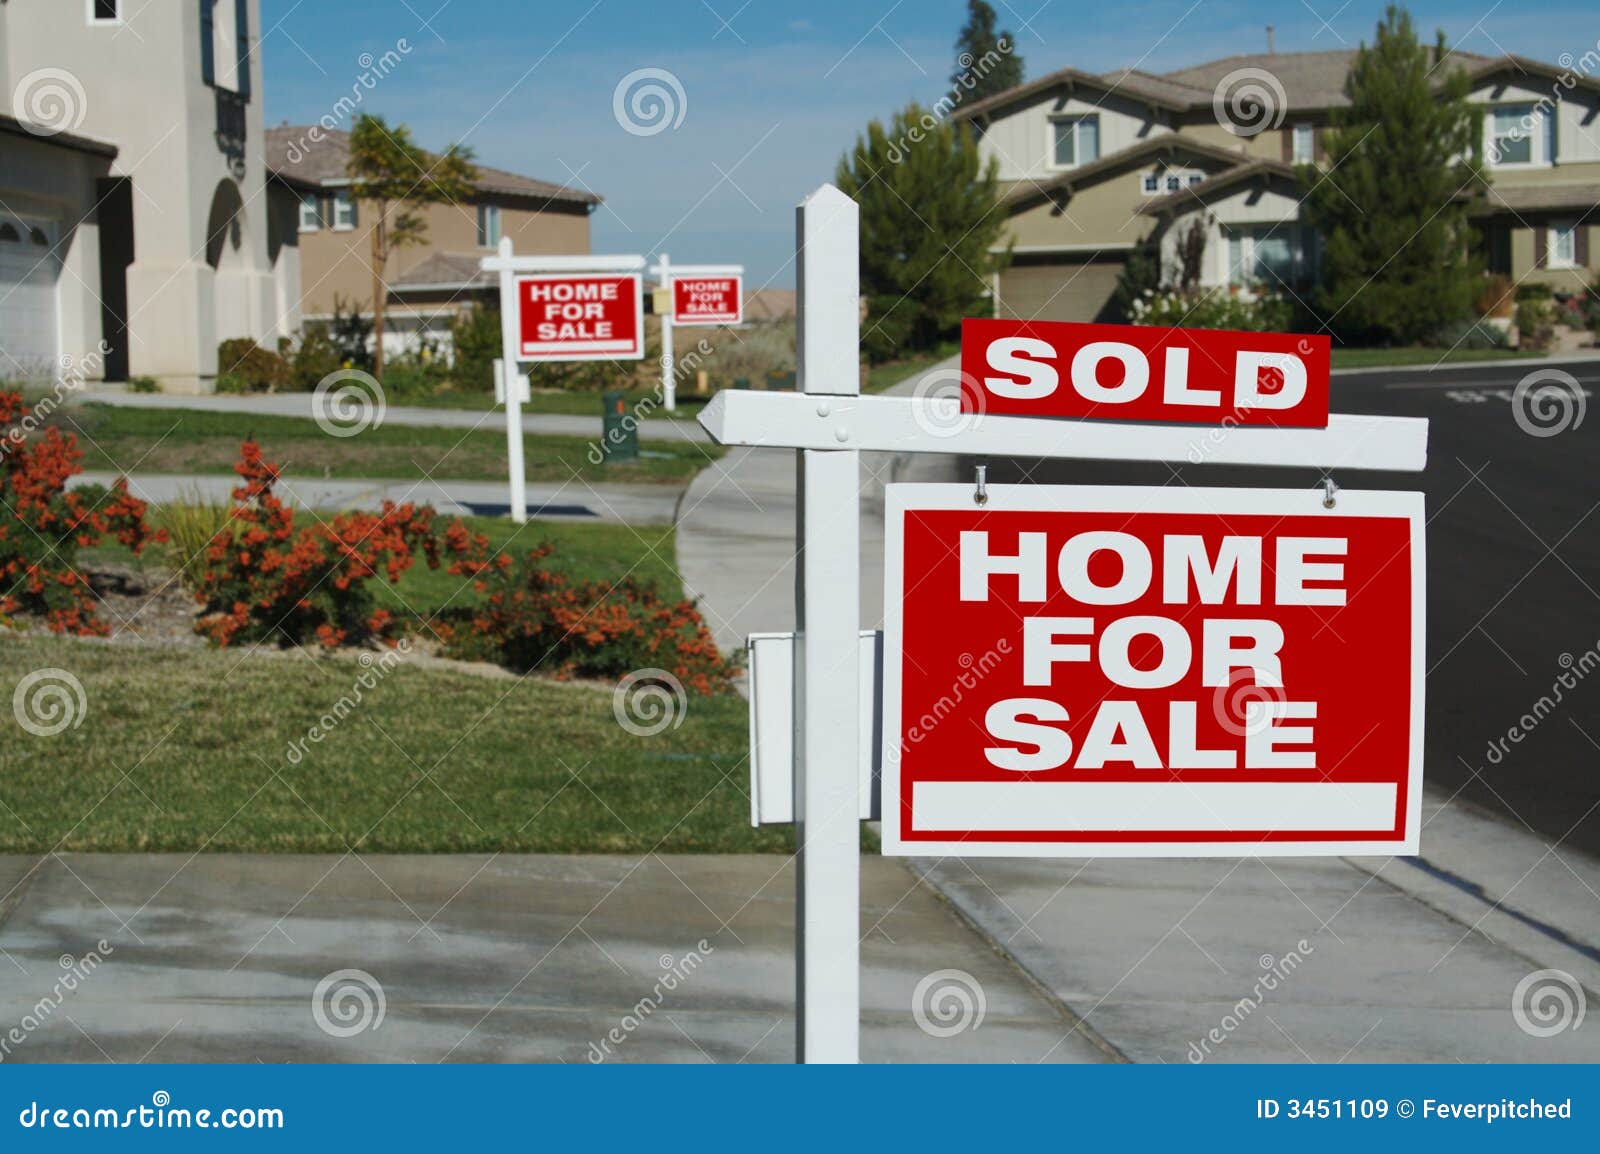 home for sale signs & one sold